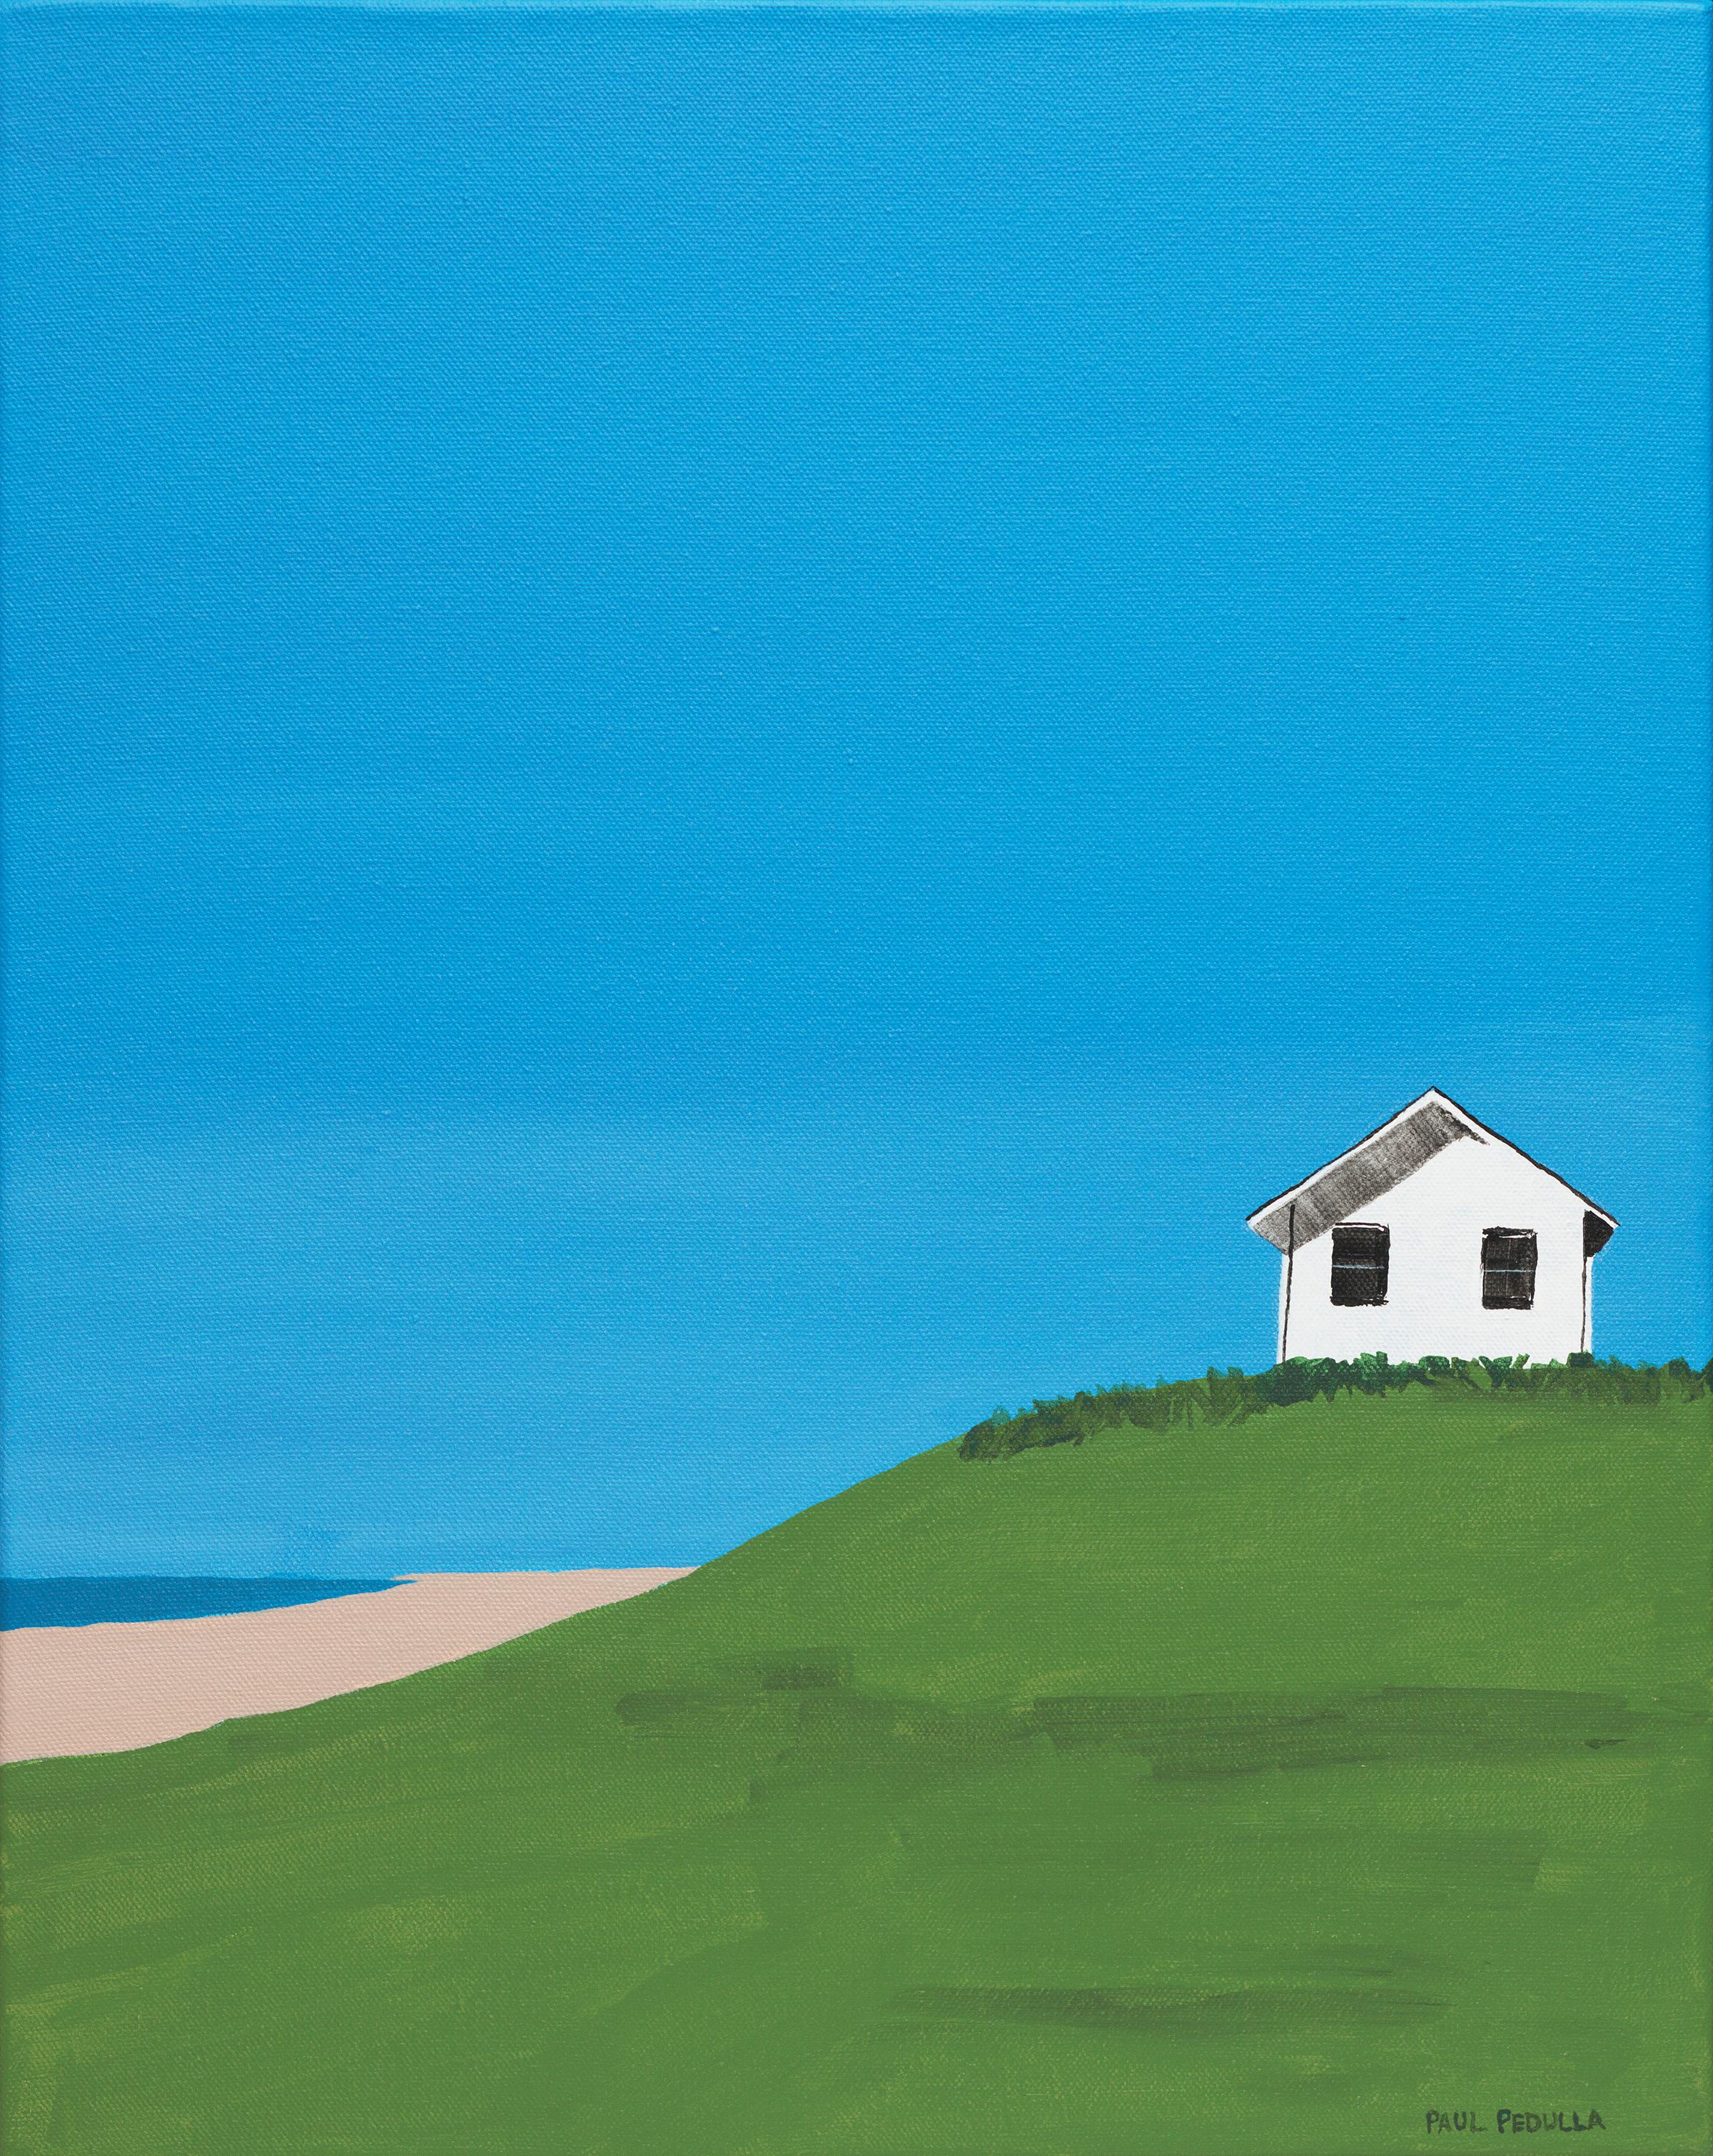 Paul Pedulla Landscape Print - Cottage on the Hill